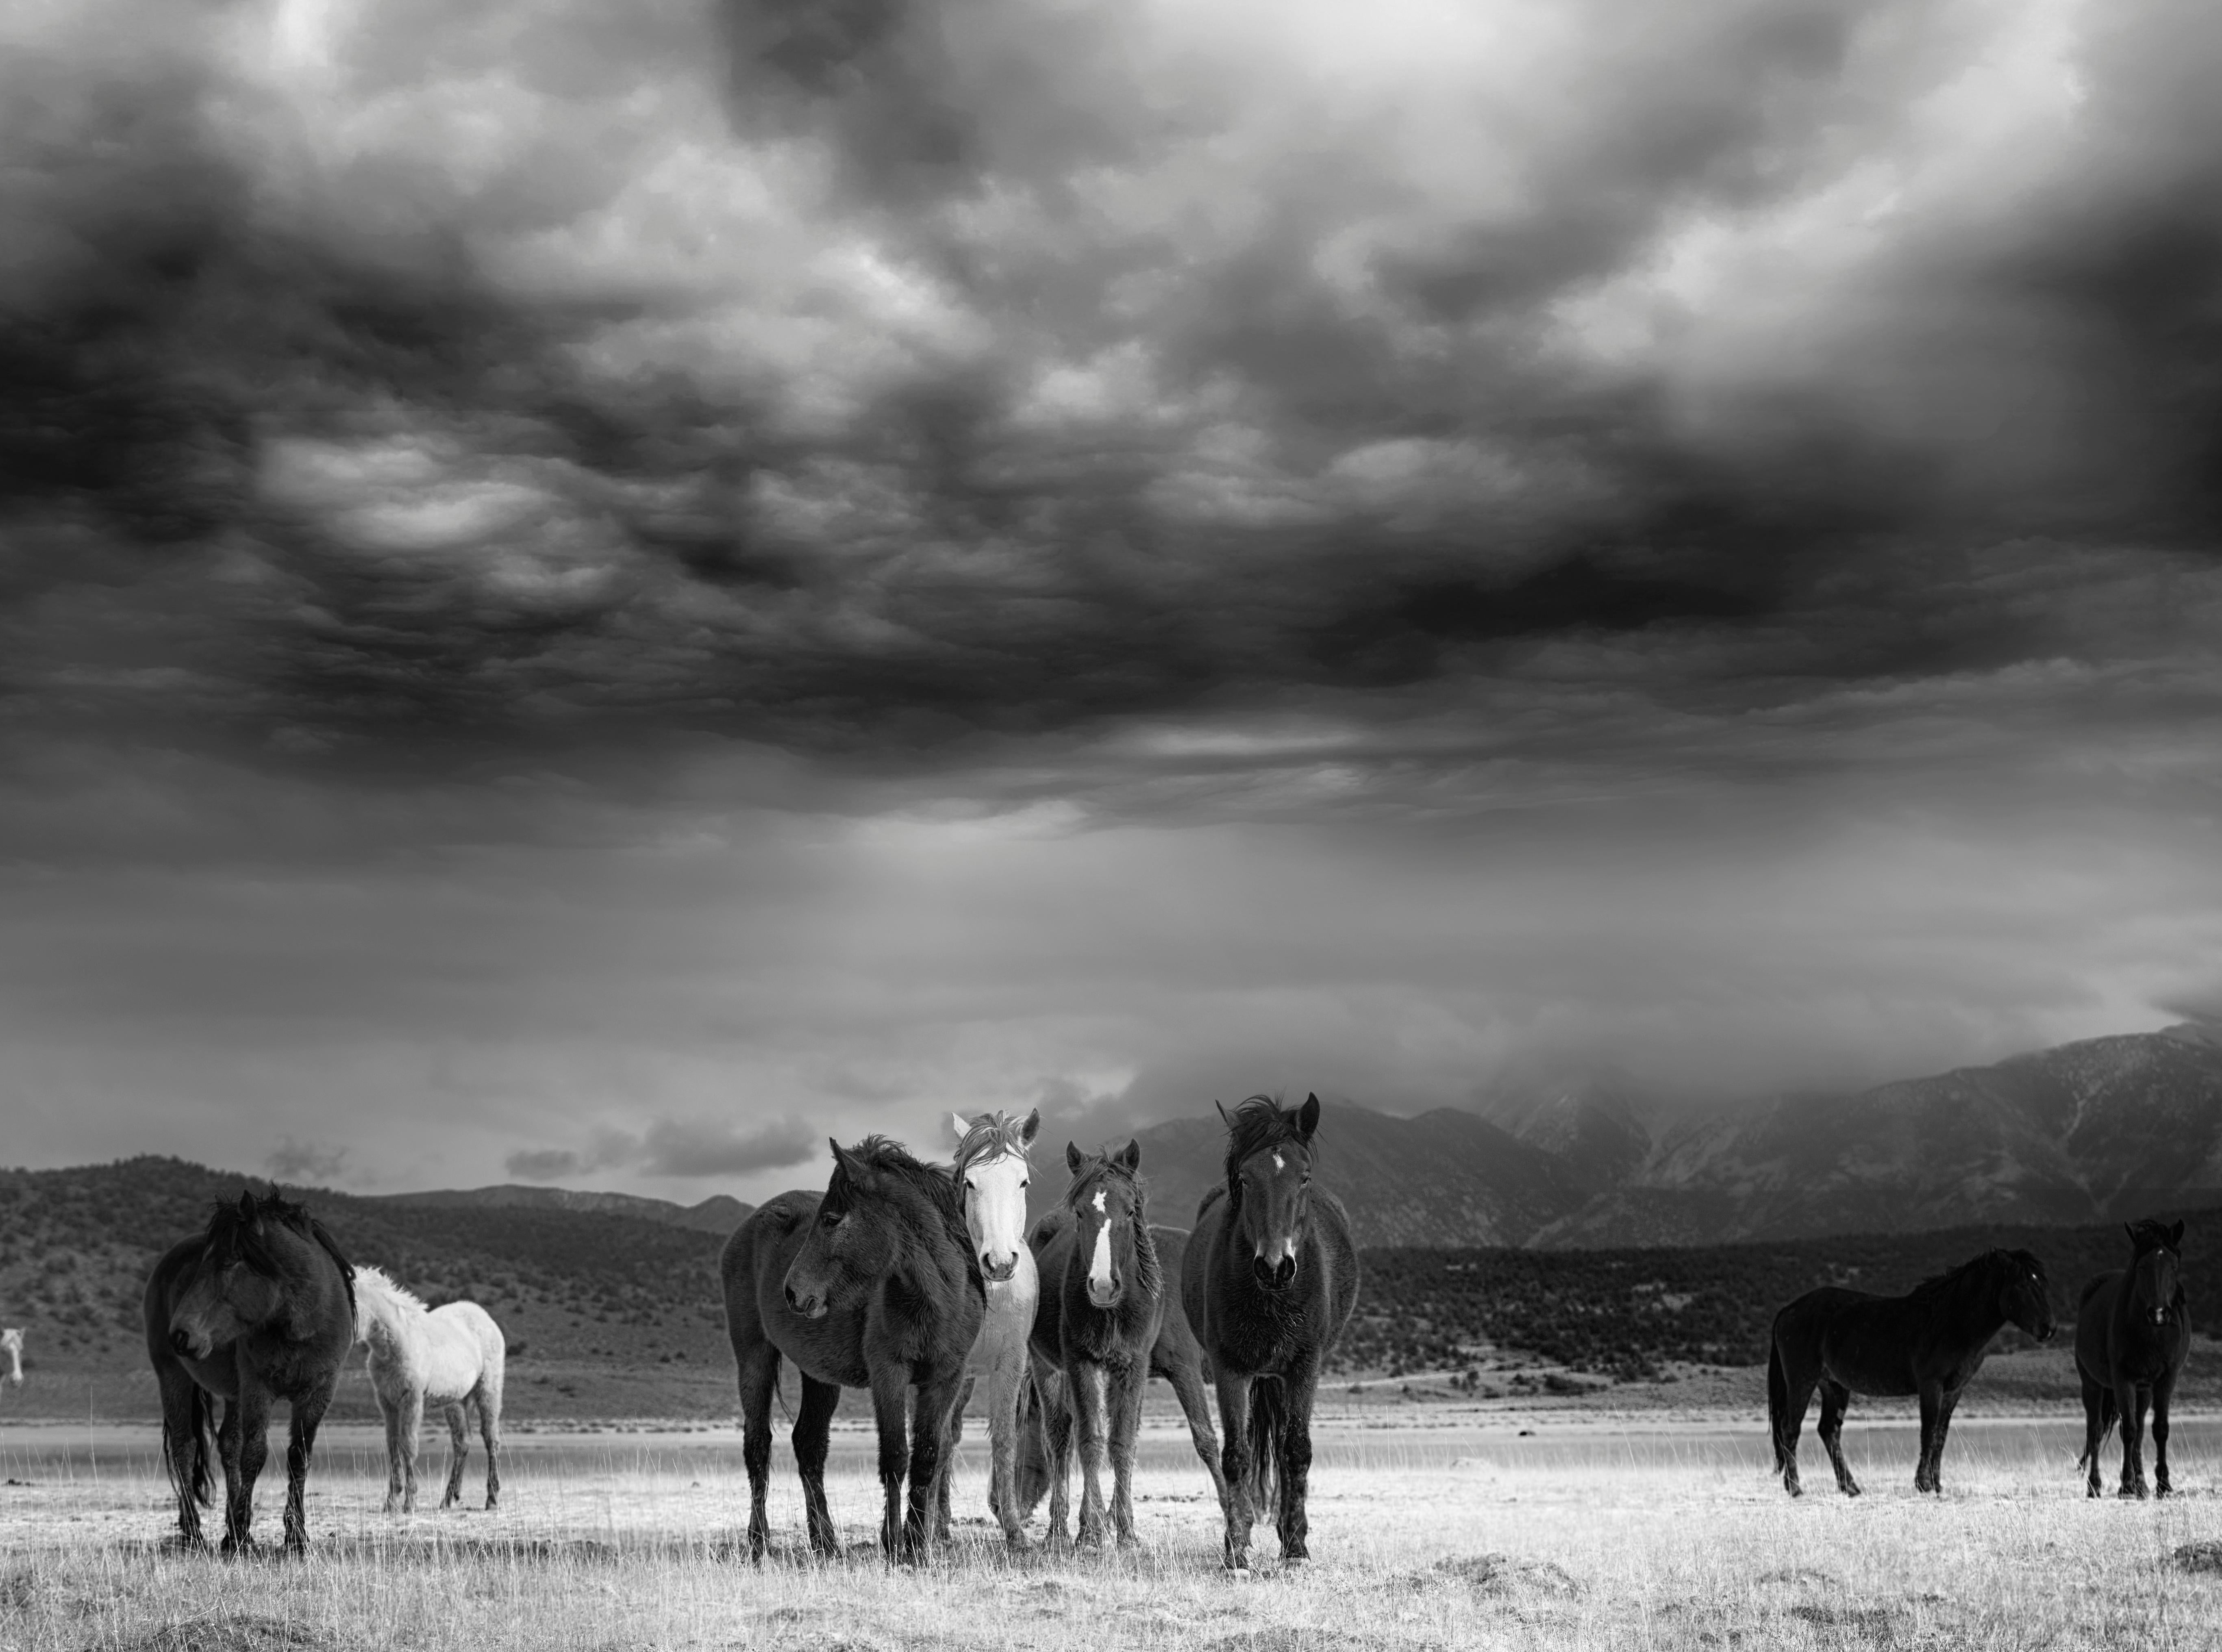 Shane Russeck Landscape Photograph - The Calm - Contemporary Black and White Photography of Wild Horses